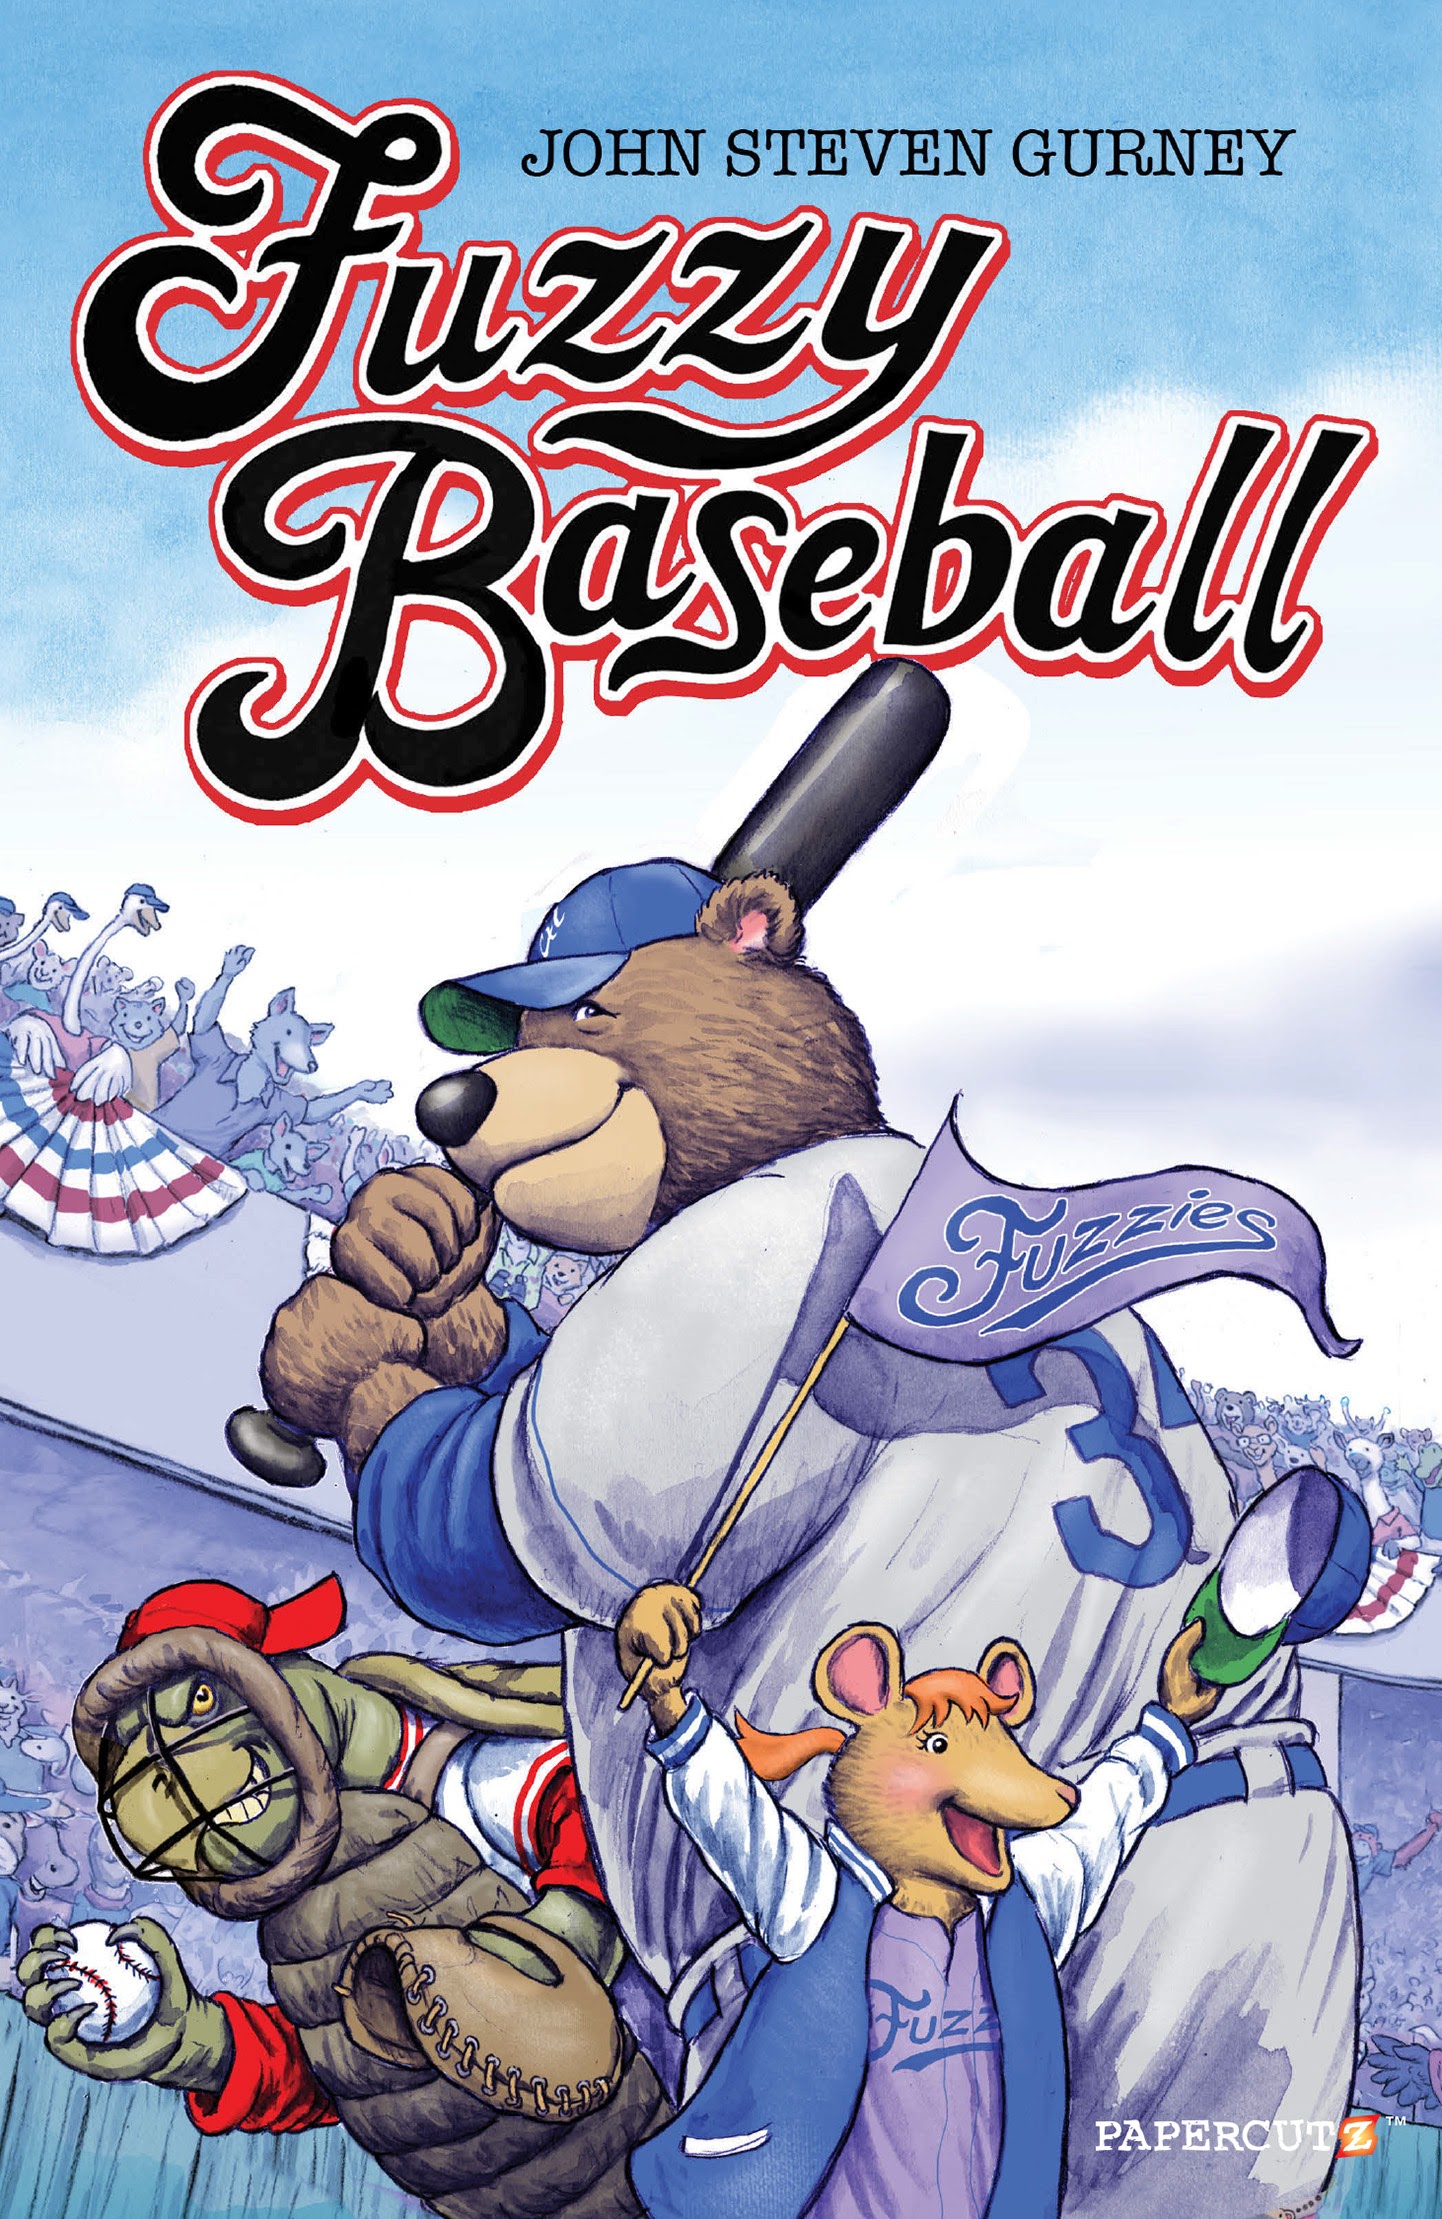 Read online Fuzzy Baseball comic -  Issue #1 - 1